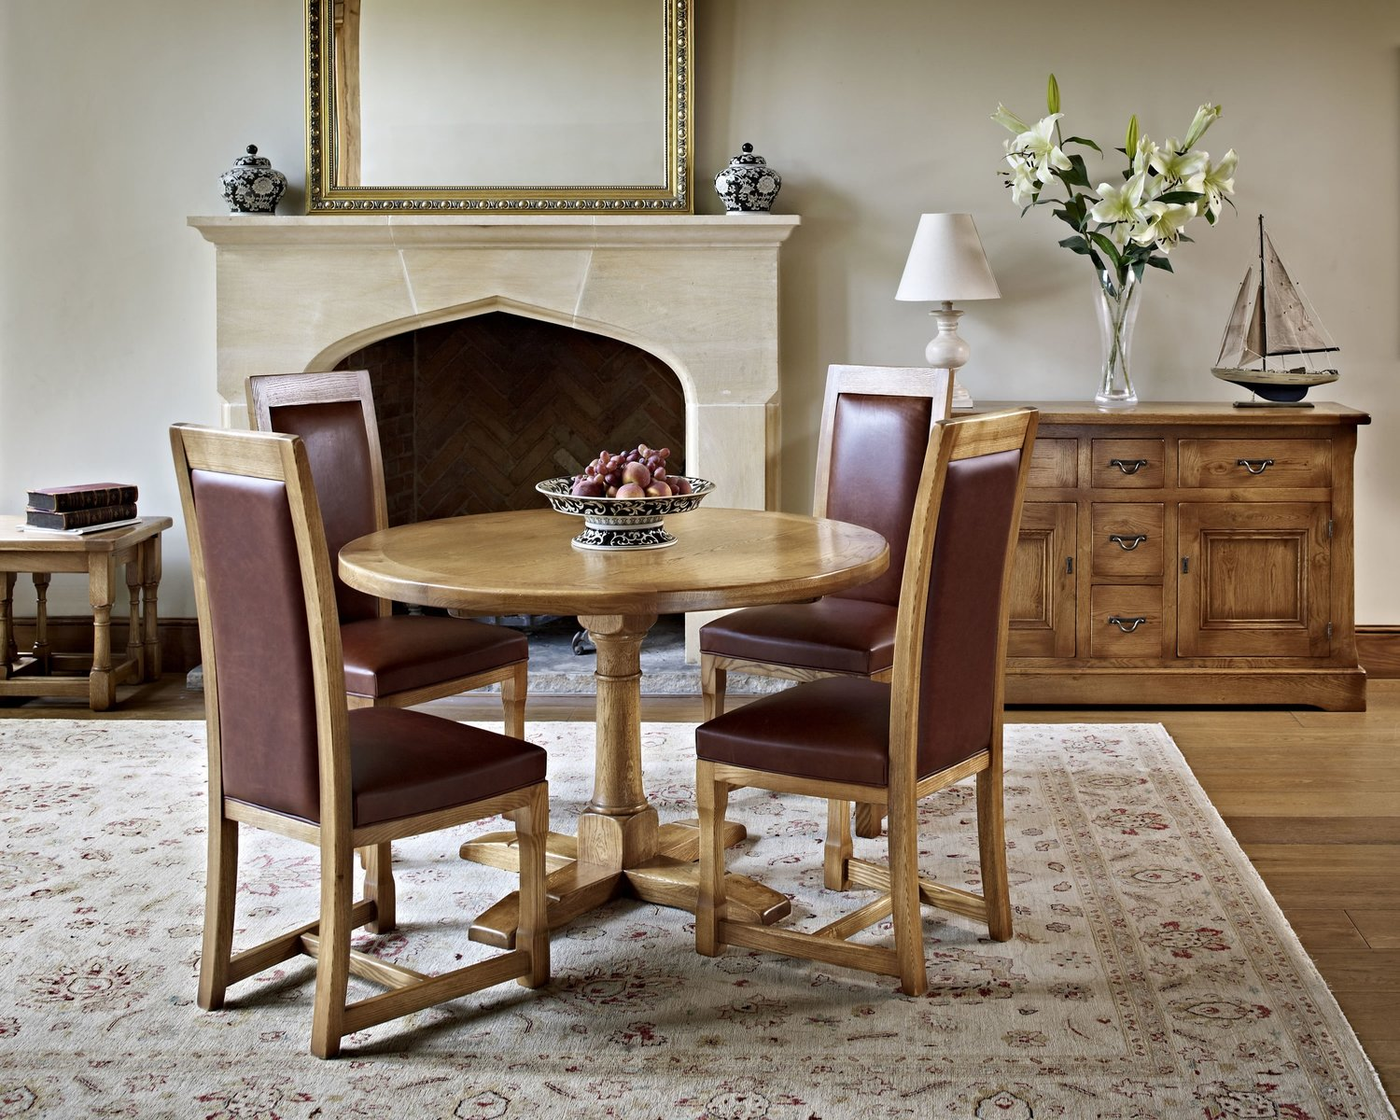 Chatsworth dining collection available at Hunters Furniture Derby